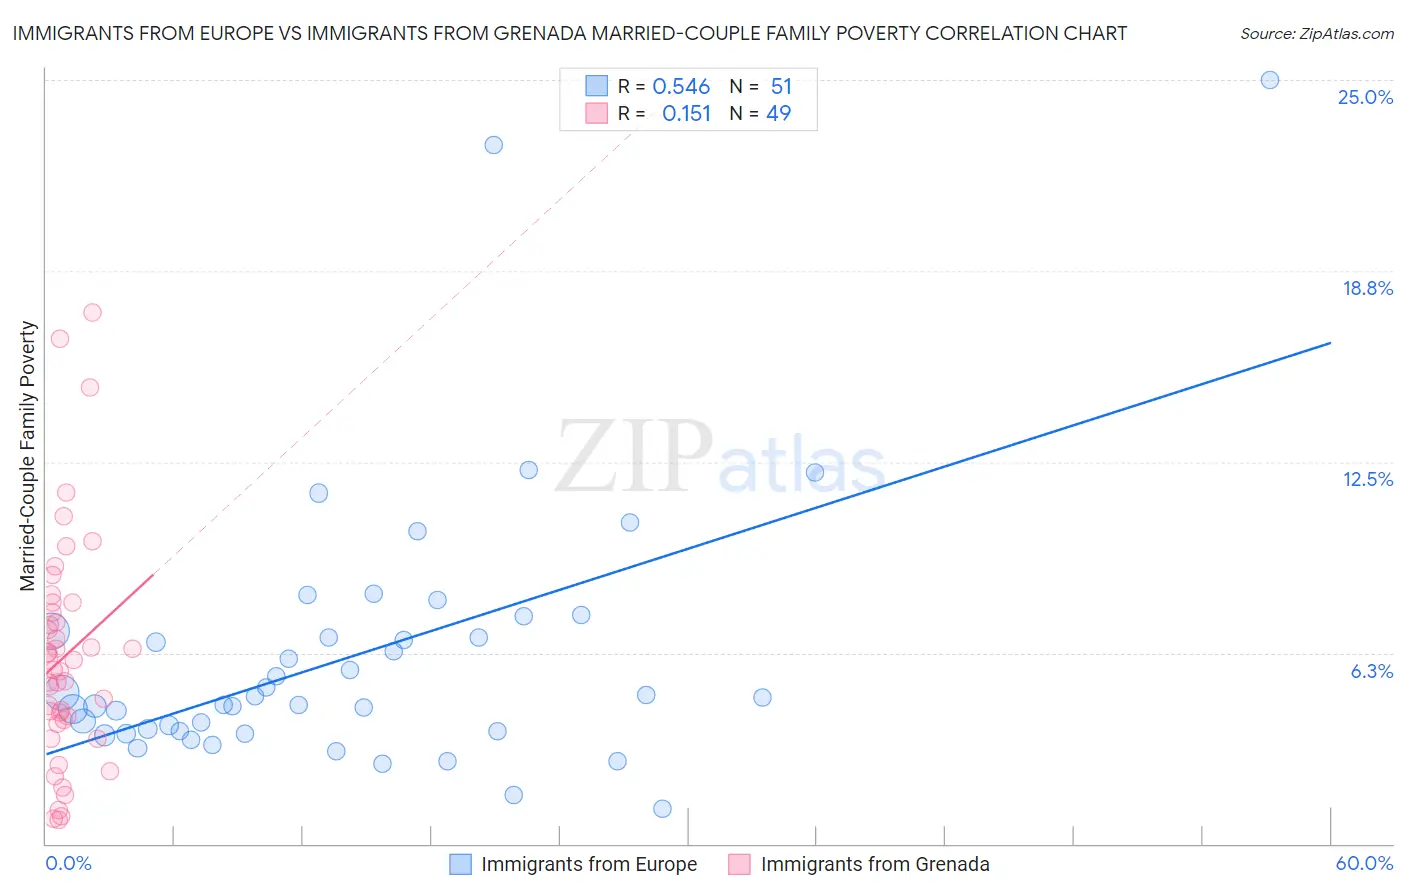 Immigrants from Europe vs Immigrants from Grenada Married-Couple Family Poverty